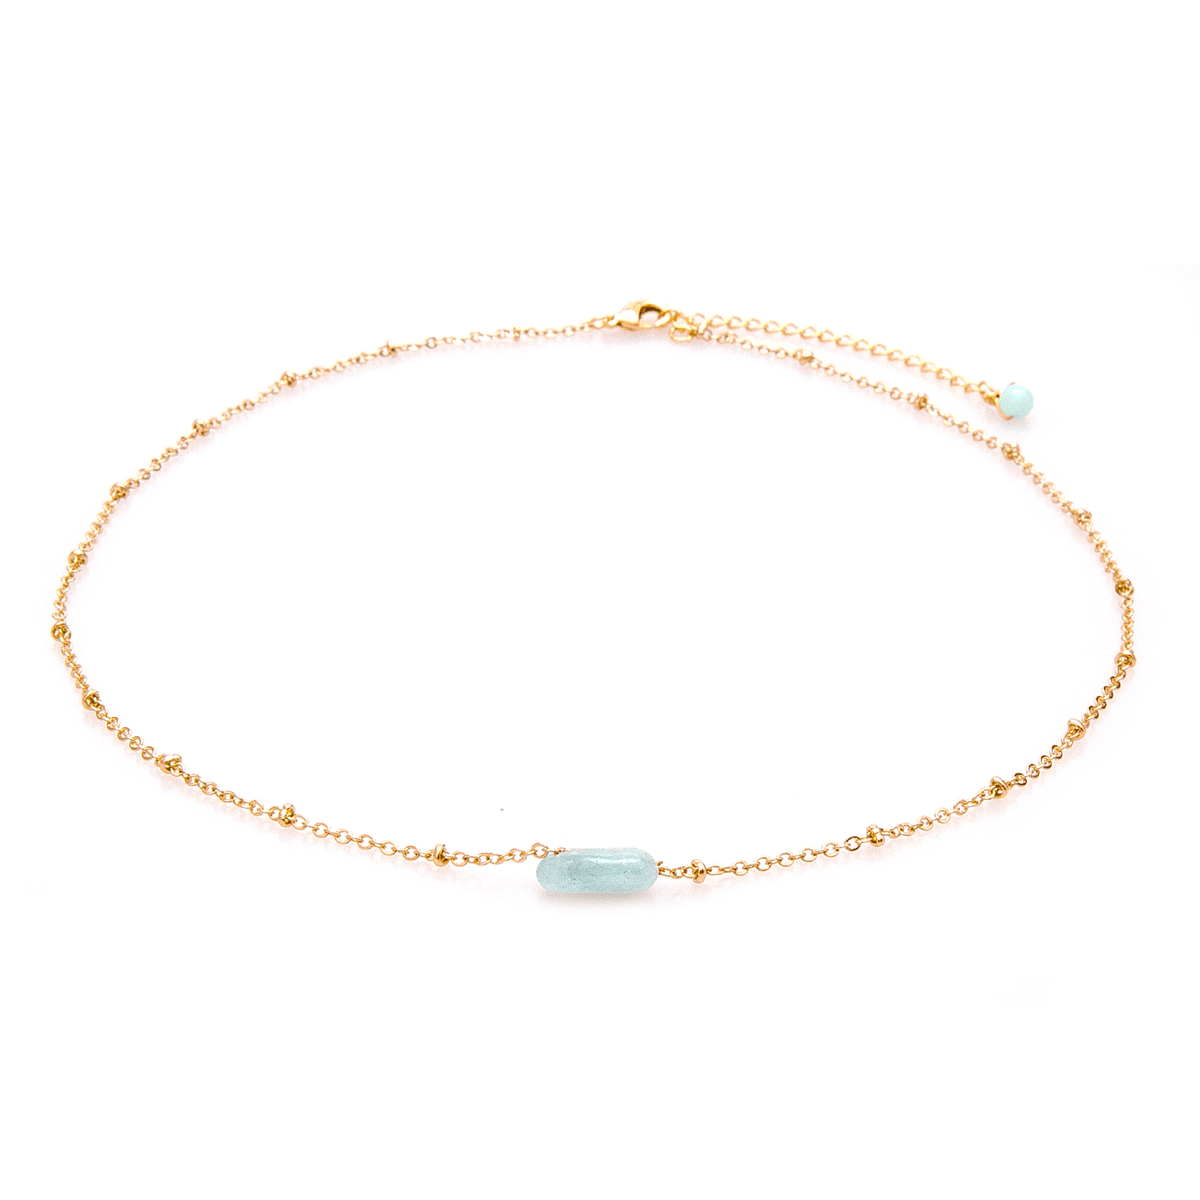 Aquamarine stone healing necklace on a gold chain